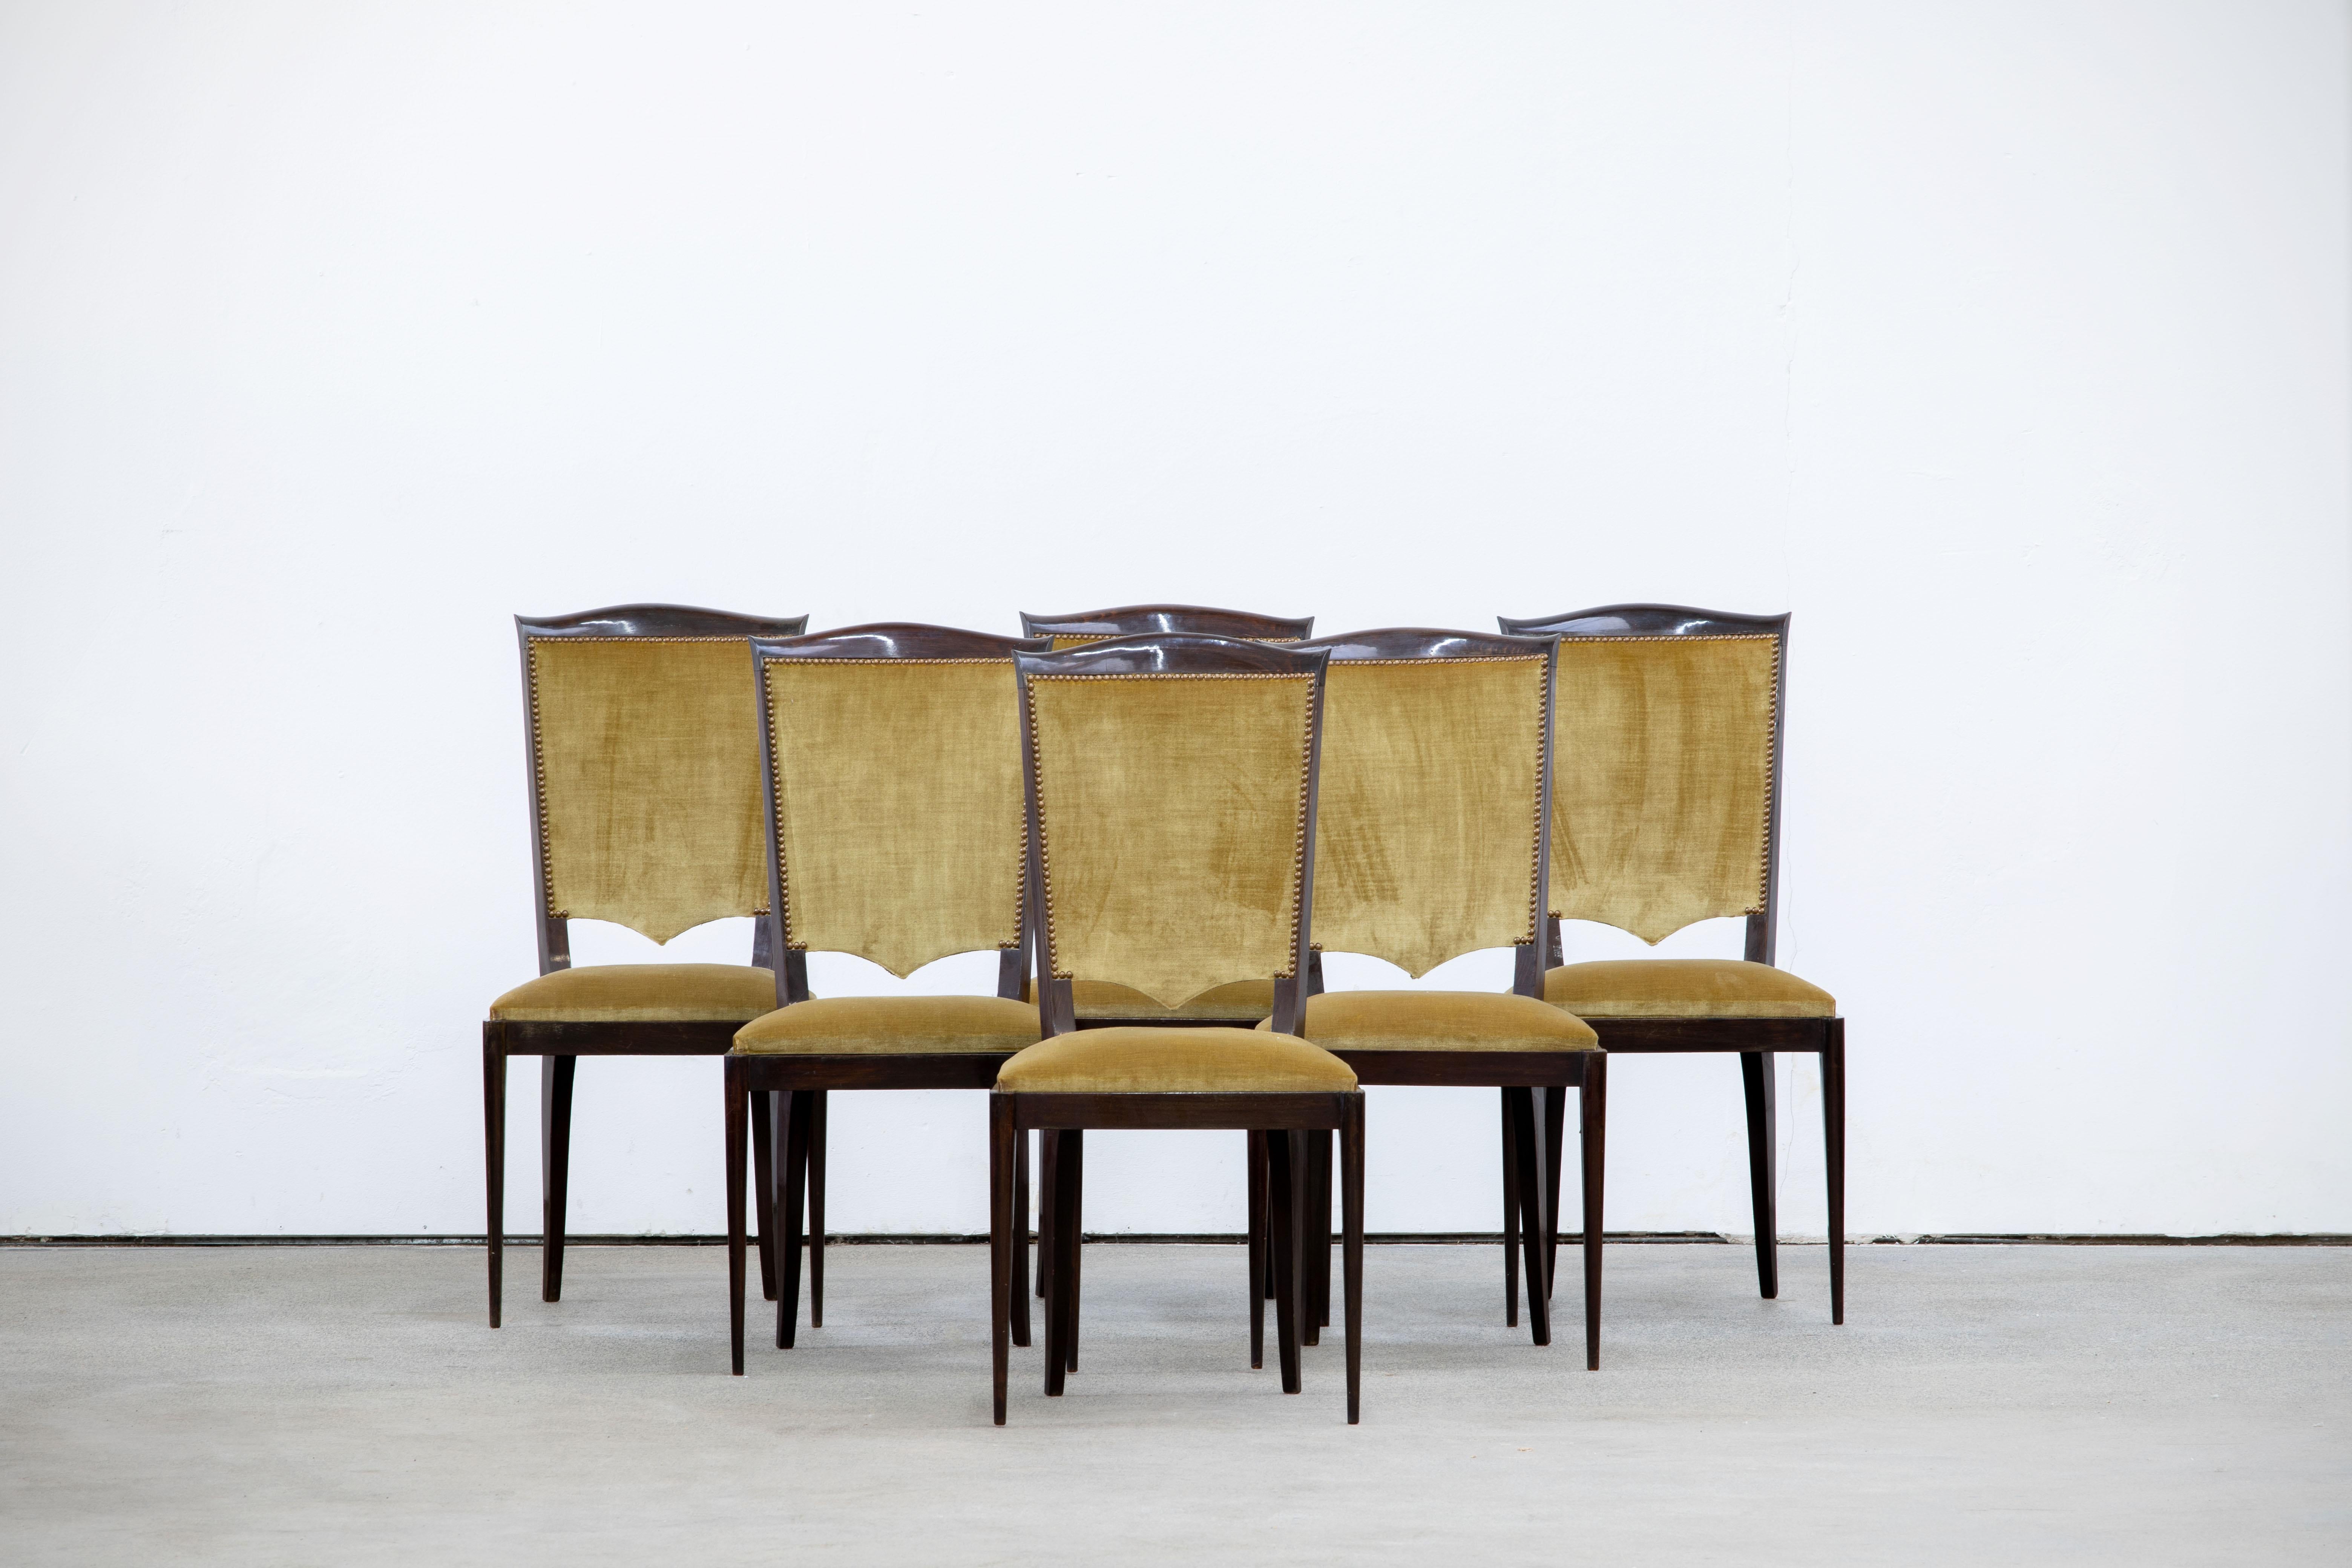 Set of six upholstered high back chairs covered in yellow Velvet, exhibiting traditional French design elements in a deep oak finish. Restored and polished.